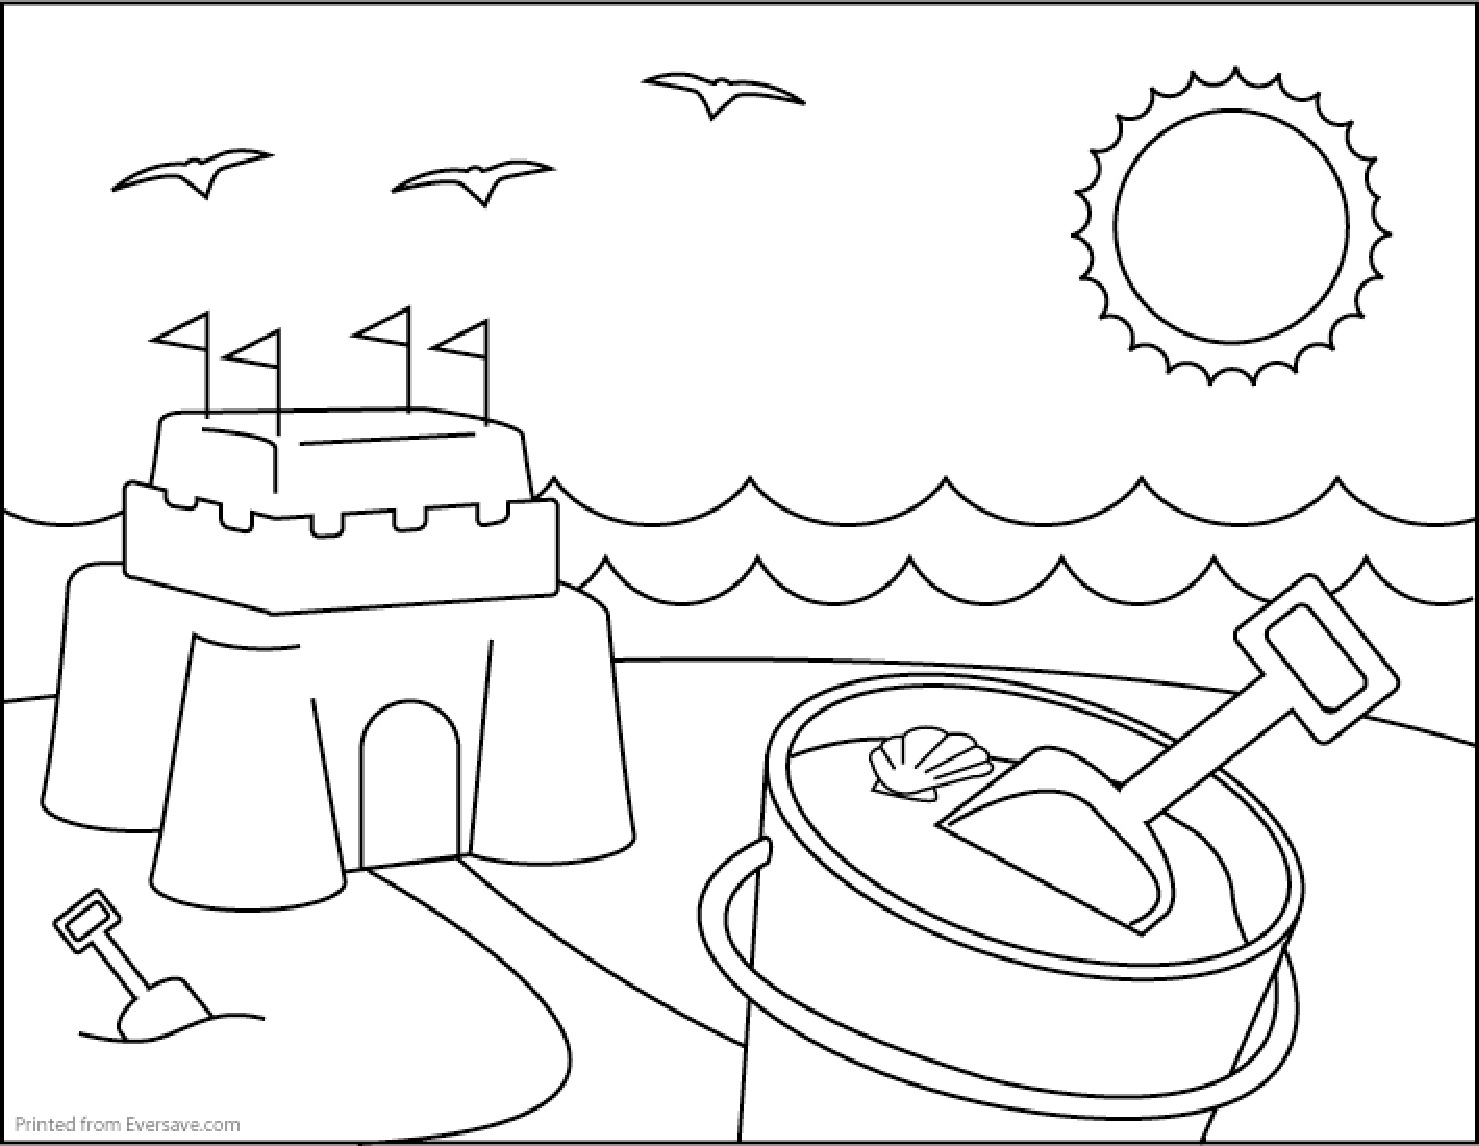 630 Cute Summertime Coloring Pages with Animal character